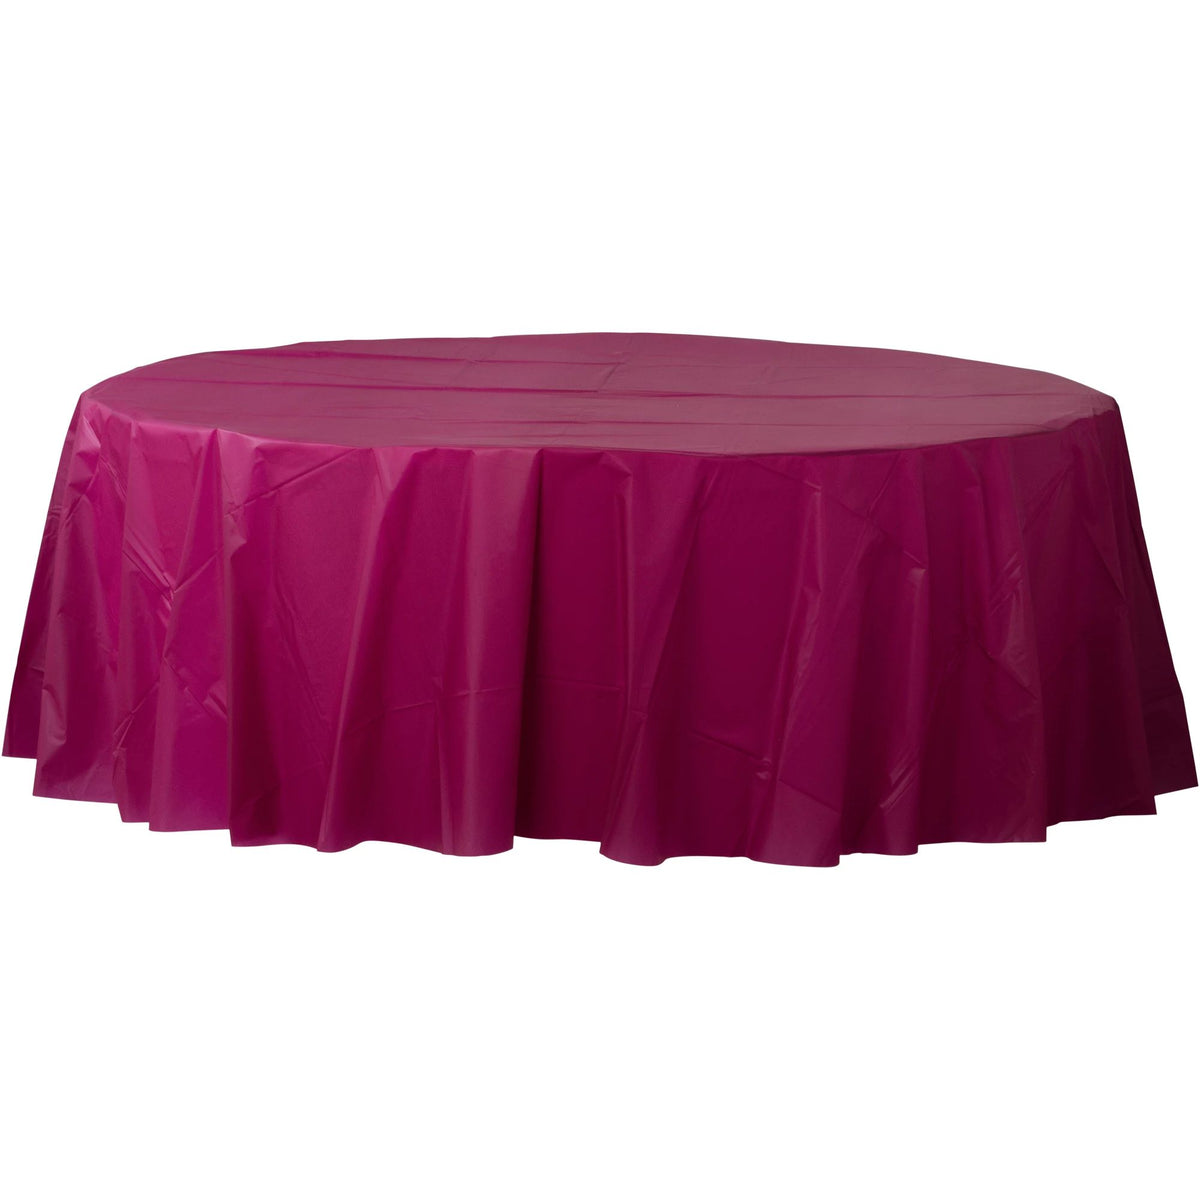 Berry 84" Round Plastic Table Cover